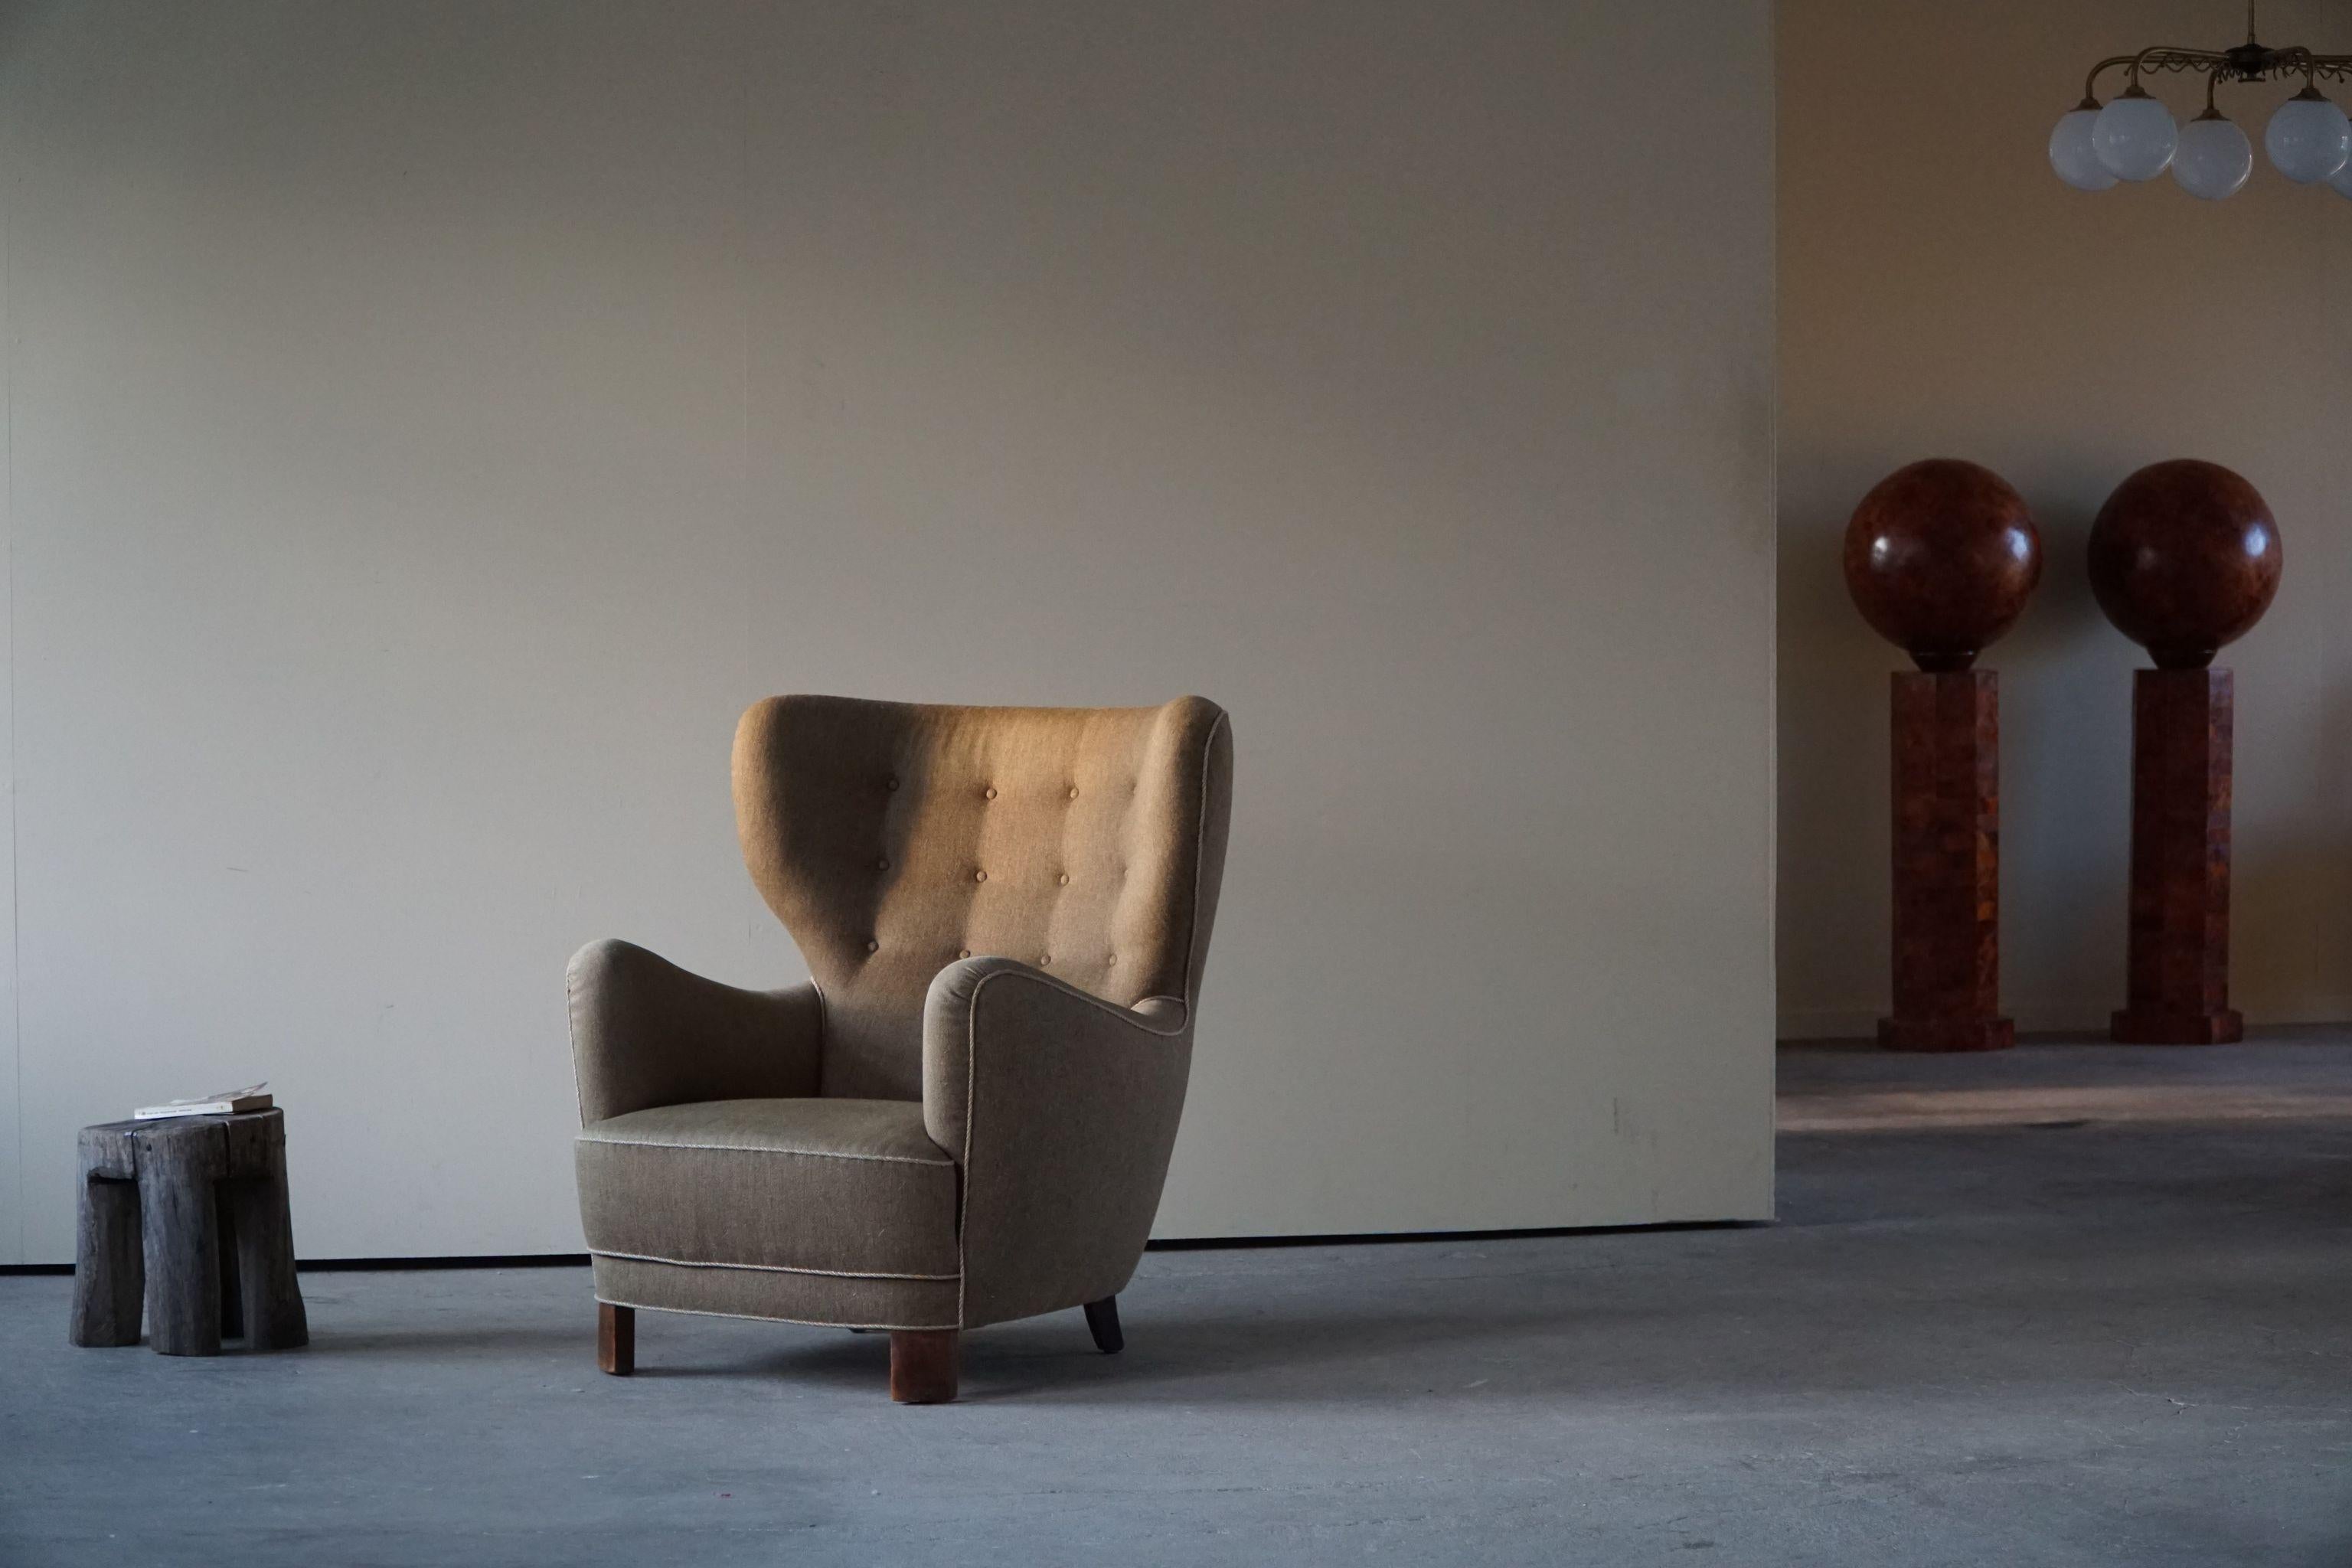 Such a voluminous and comfortable lounge chair made in the style of Flemming Lassen.
Intriguing shape and curves featured in this teddy bear, crafted by a skilled cabinetmaker in Denmark, ca 1940s.

This lovely armchair will complement many